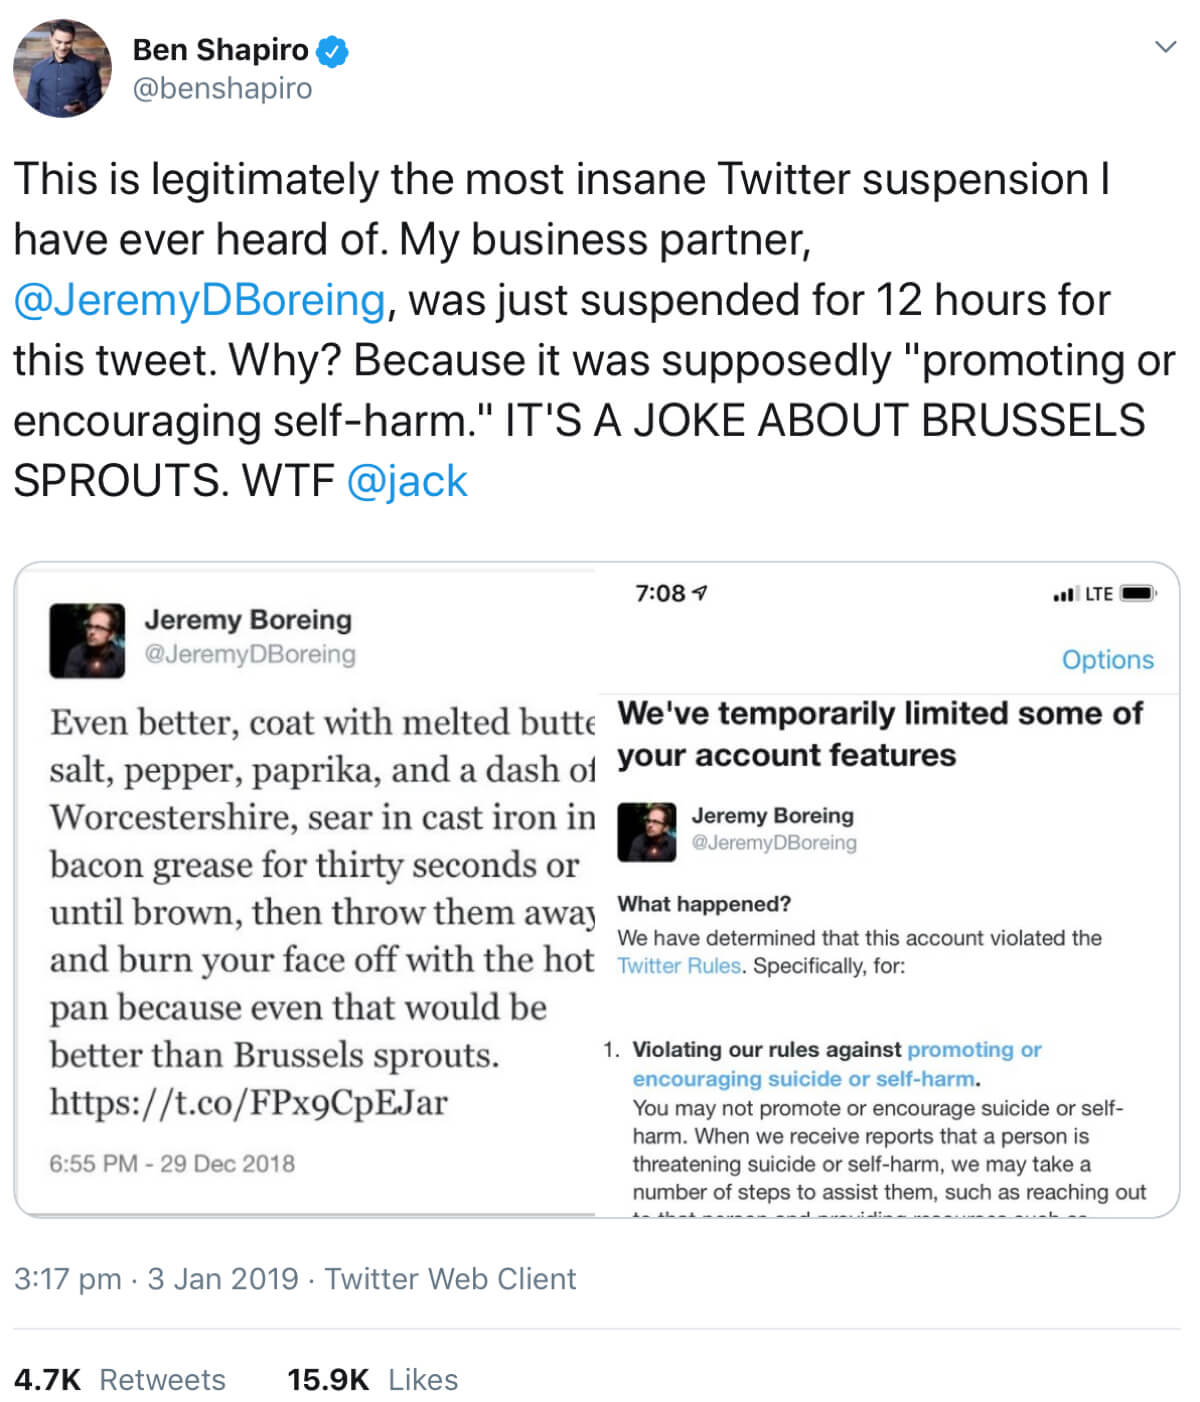 A tweet from @benshapiro showing screenshots of the tweets that led to his business partner @JeremyDBoreing being temporarily suspended from Twitter.